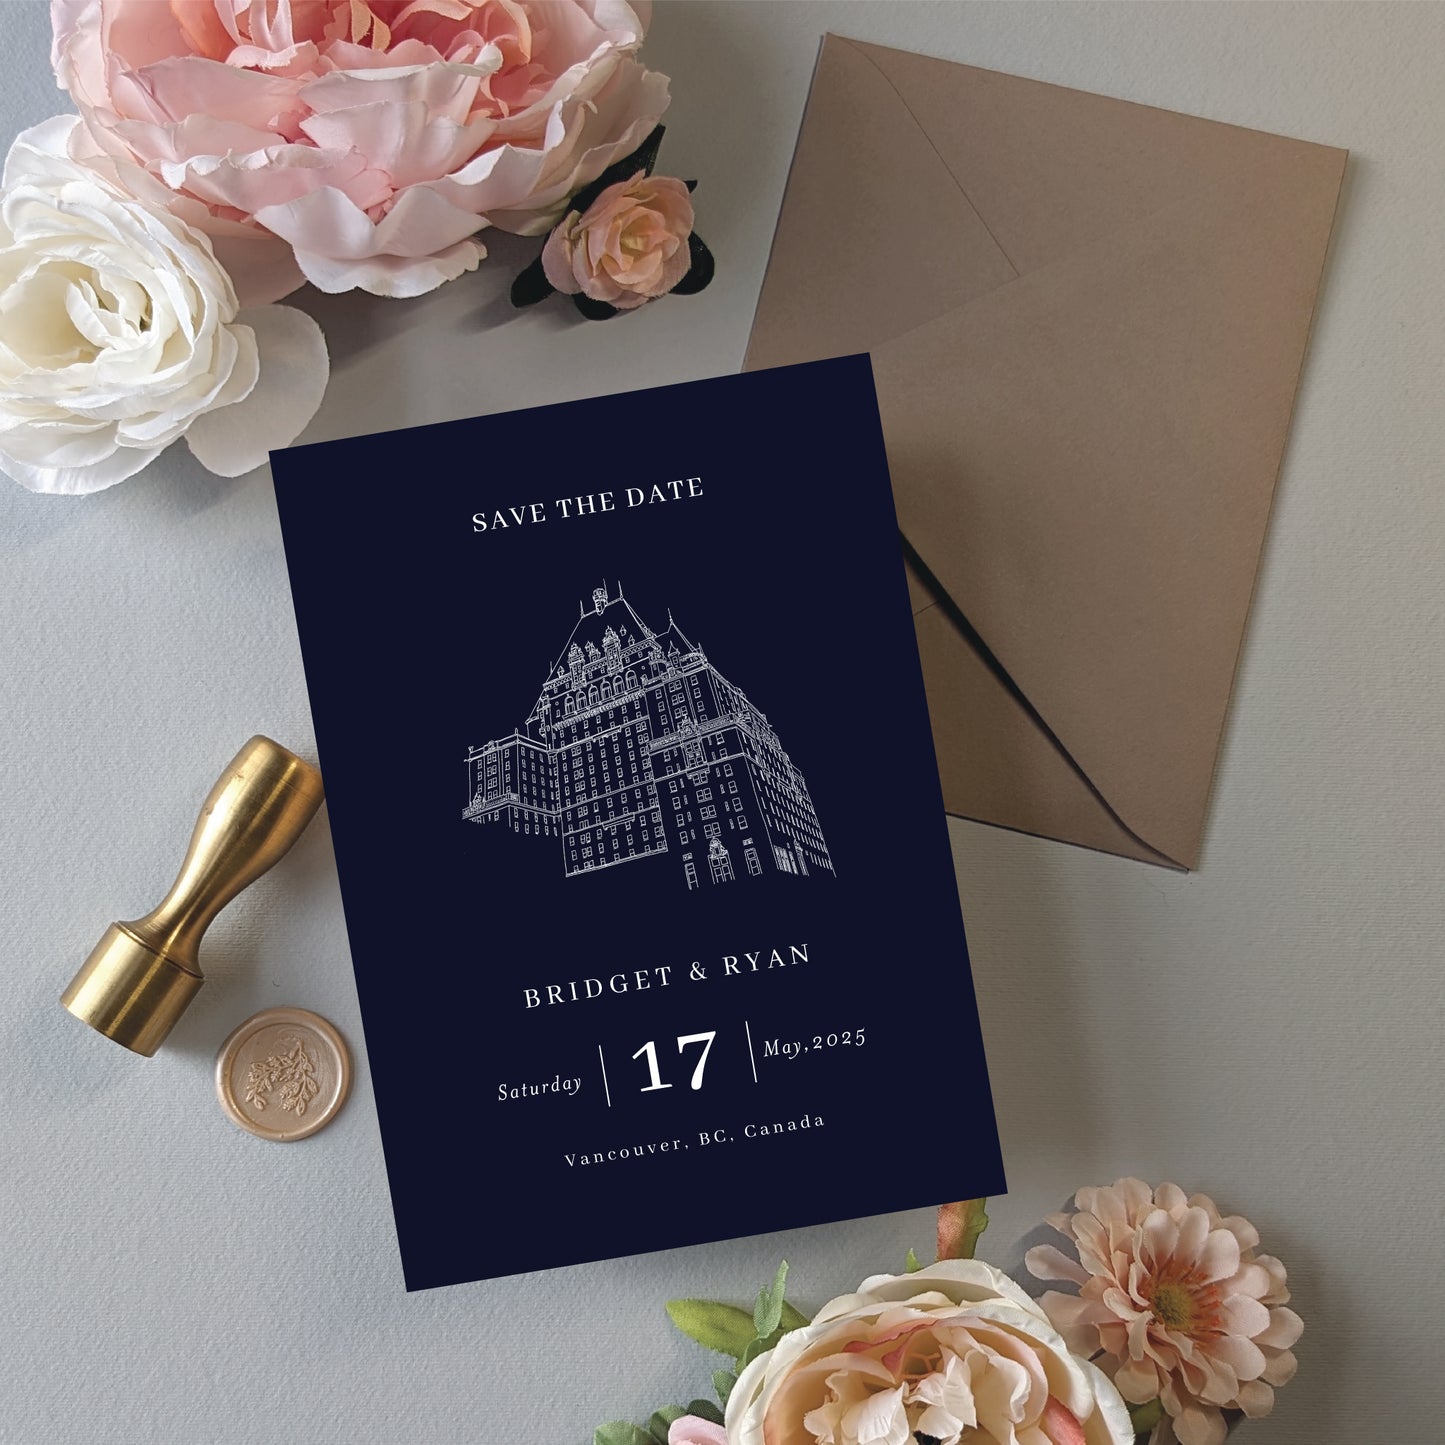 Digital Save the Date - Venue with Classic Text